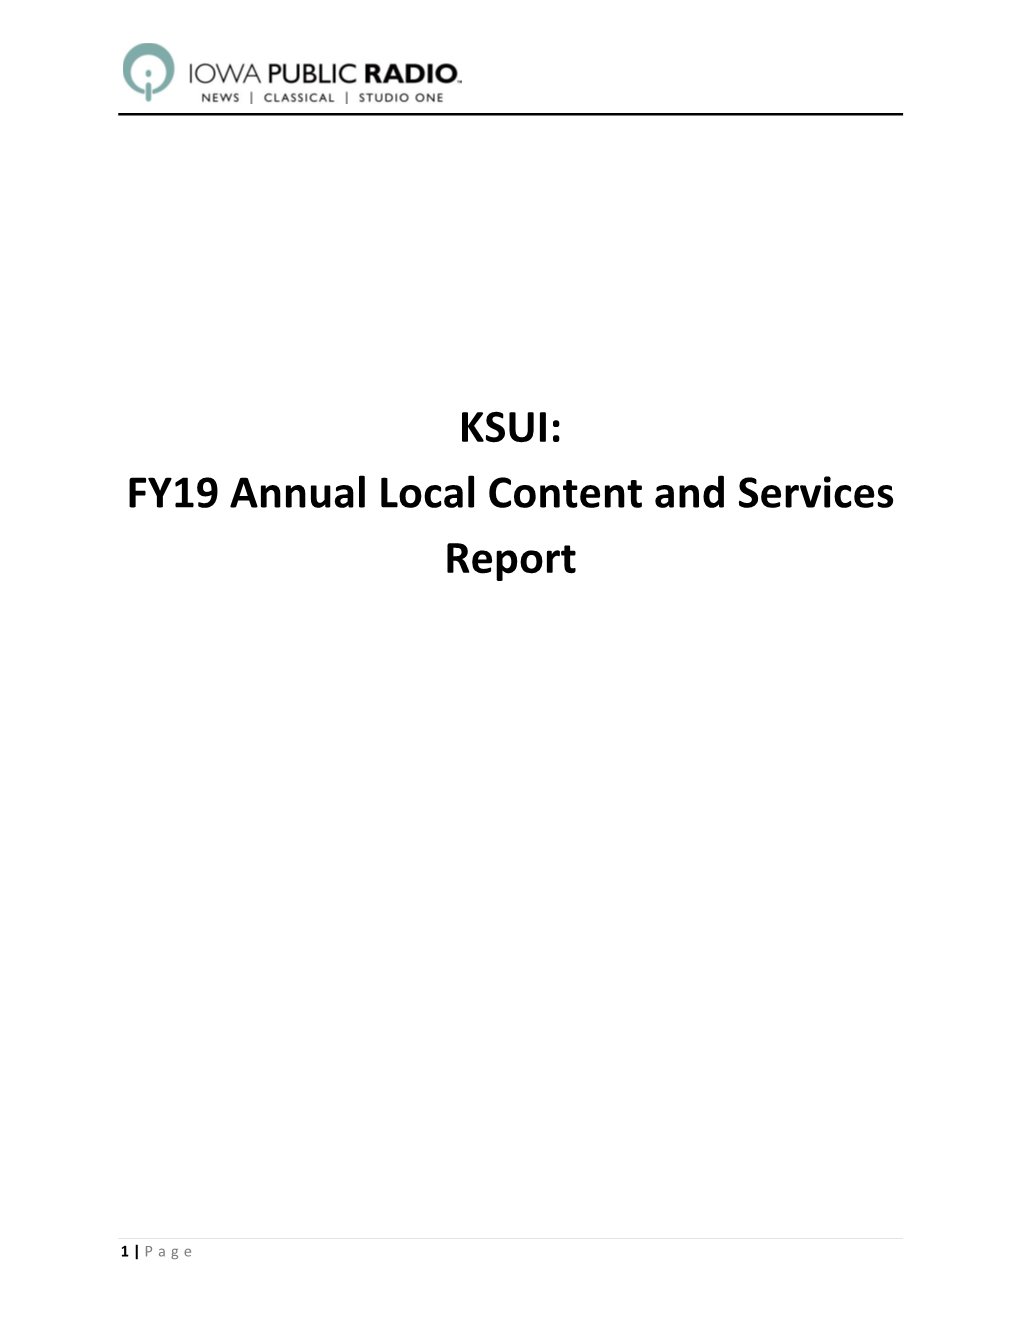 KSUI: FY19 Annual Local Content and Services Report